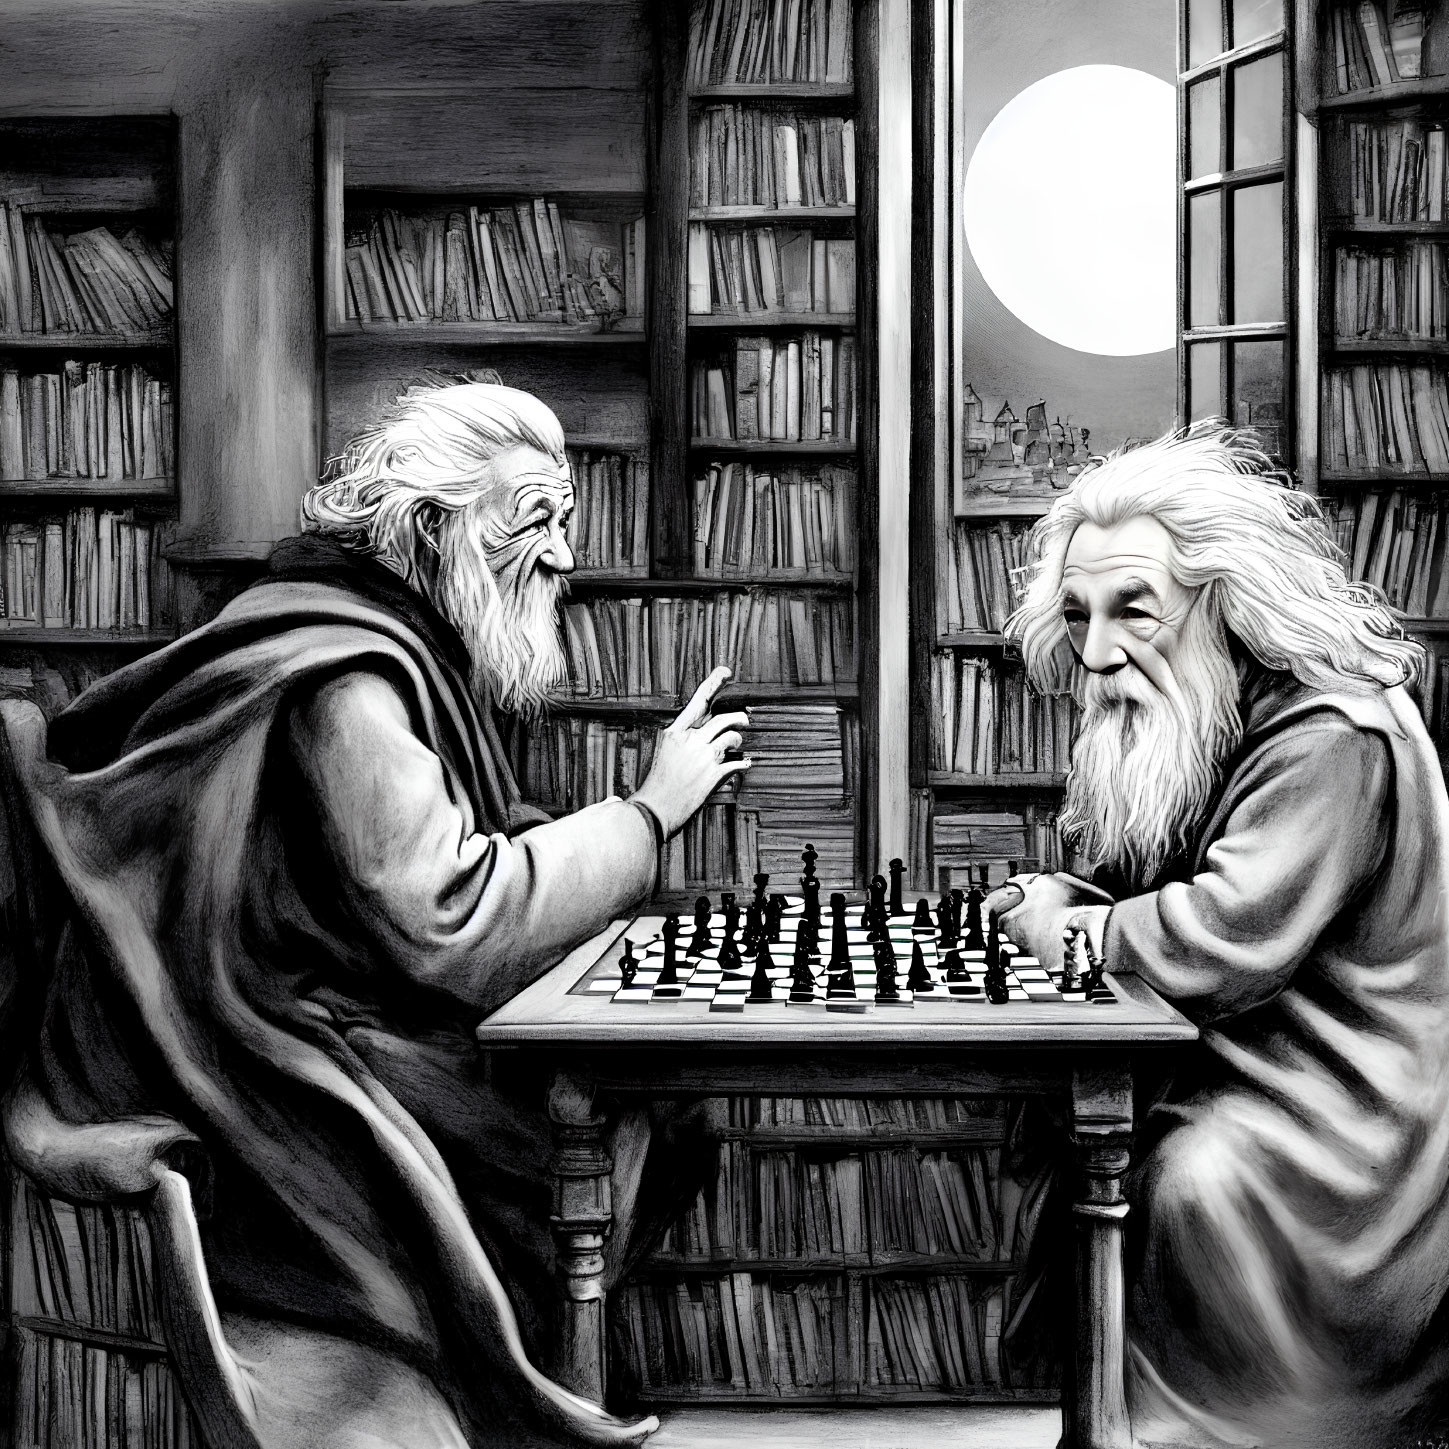 Elderly men playing chess in cozy library under full moon